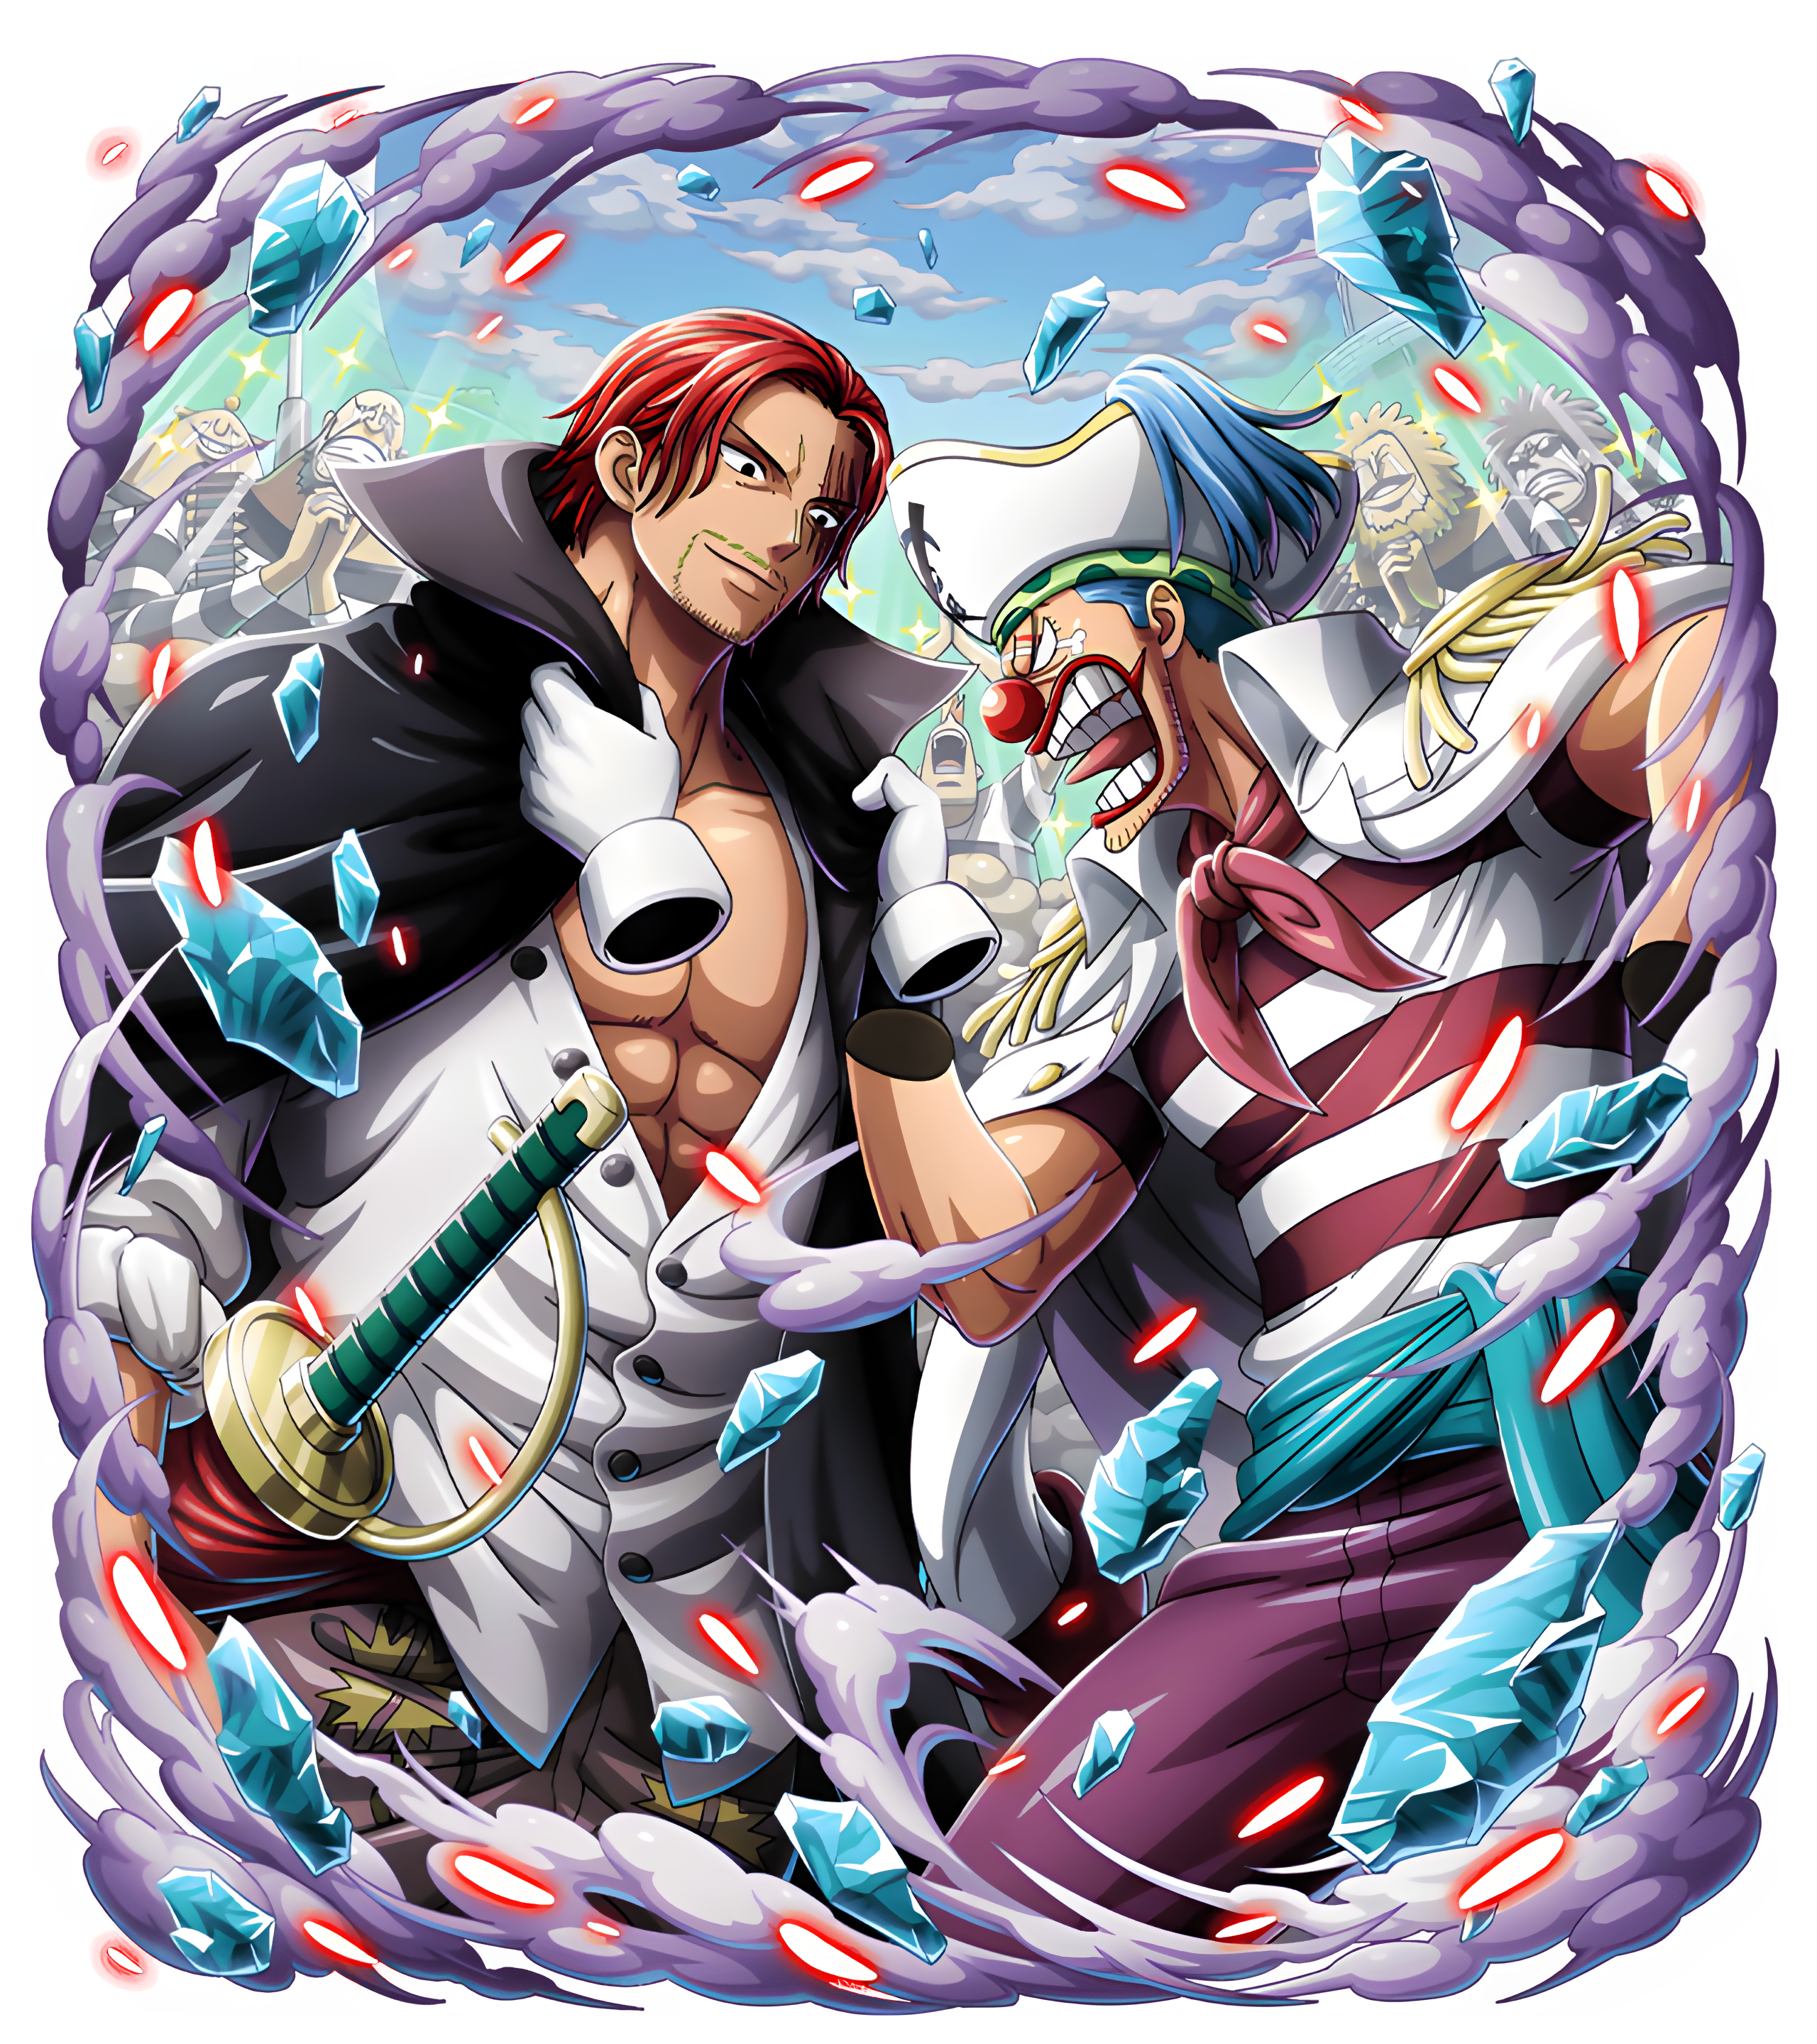 Crew Shanks - One Piece by caiquenadal on DeviantArt